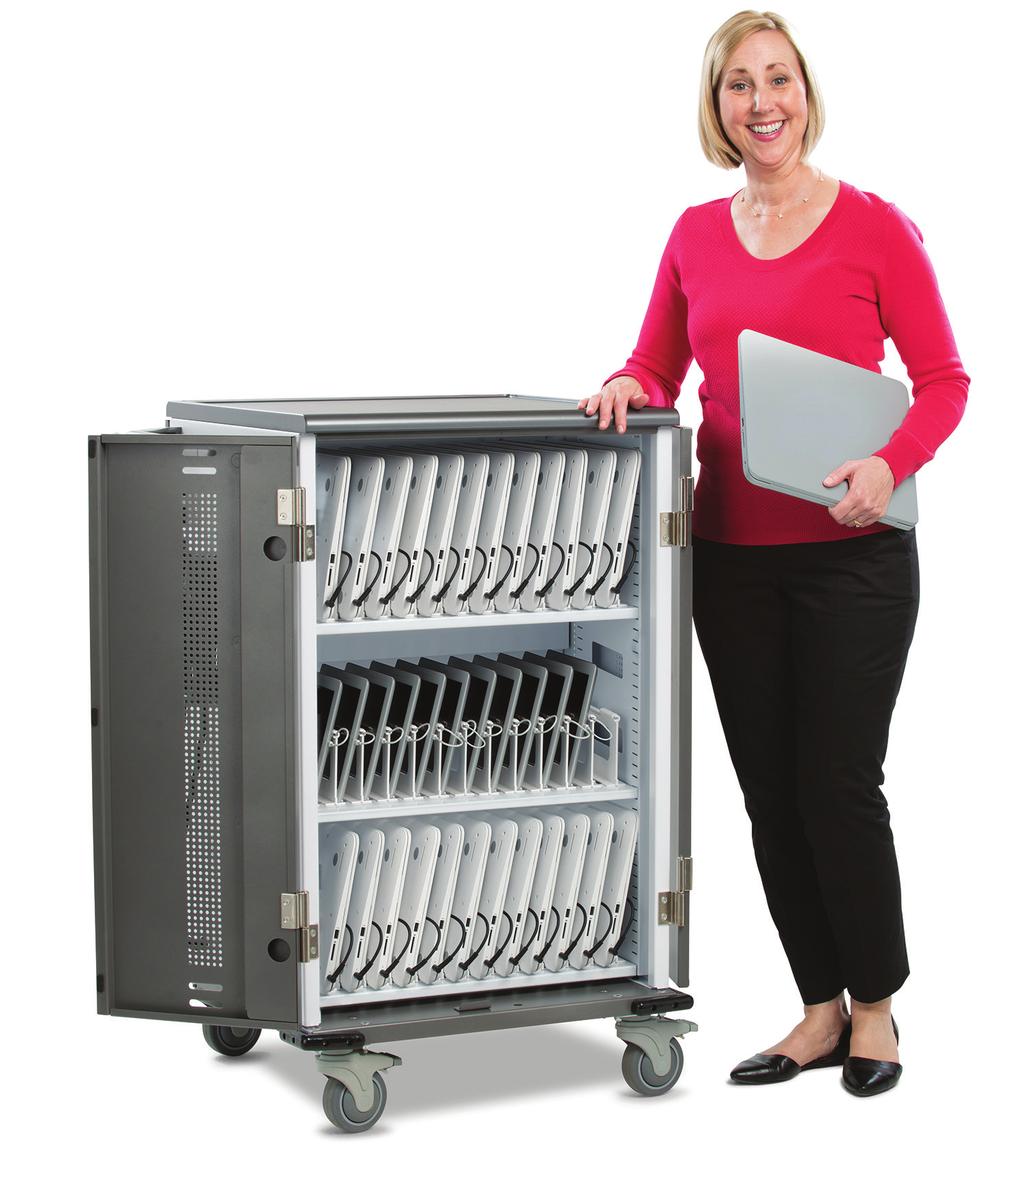 devices: tablets, Chromebooks, laptops and more Separate locking IT area Durable, solid construction with